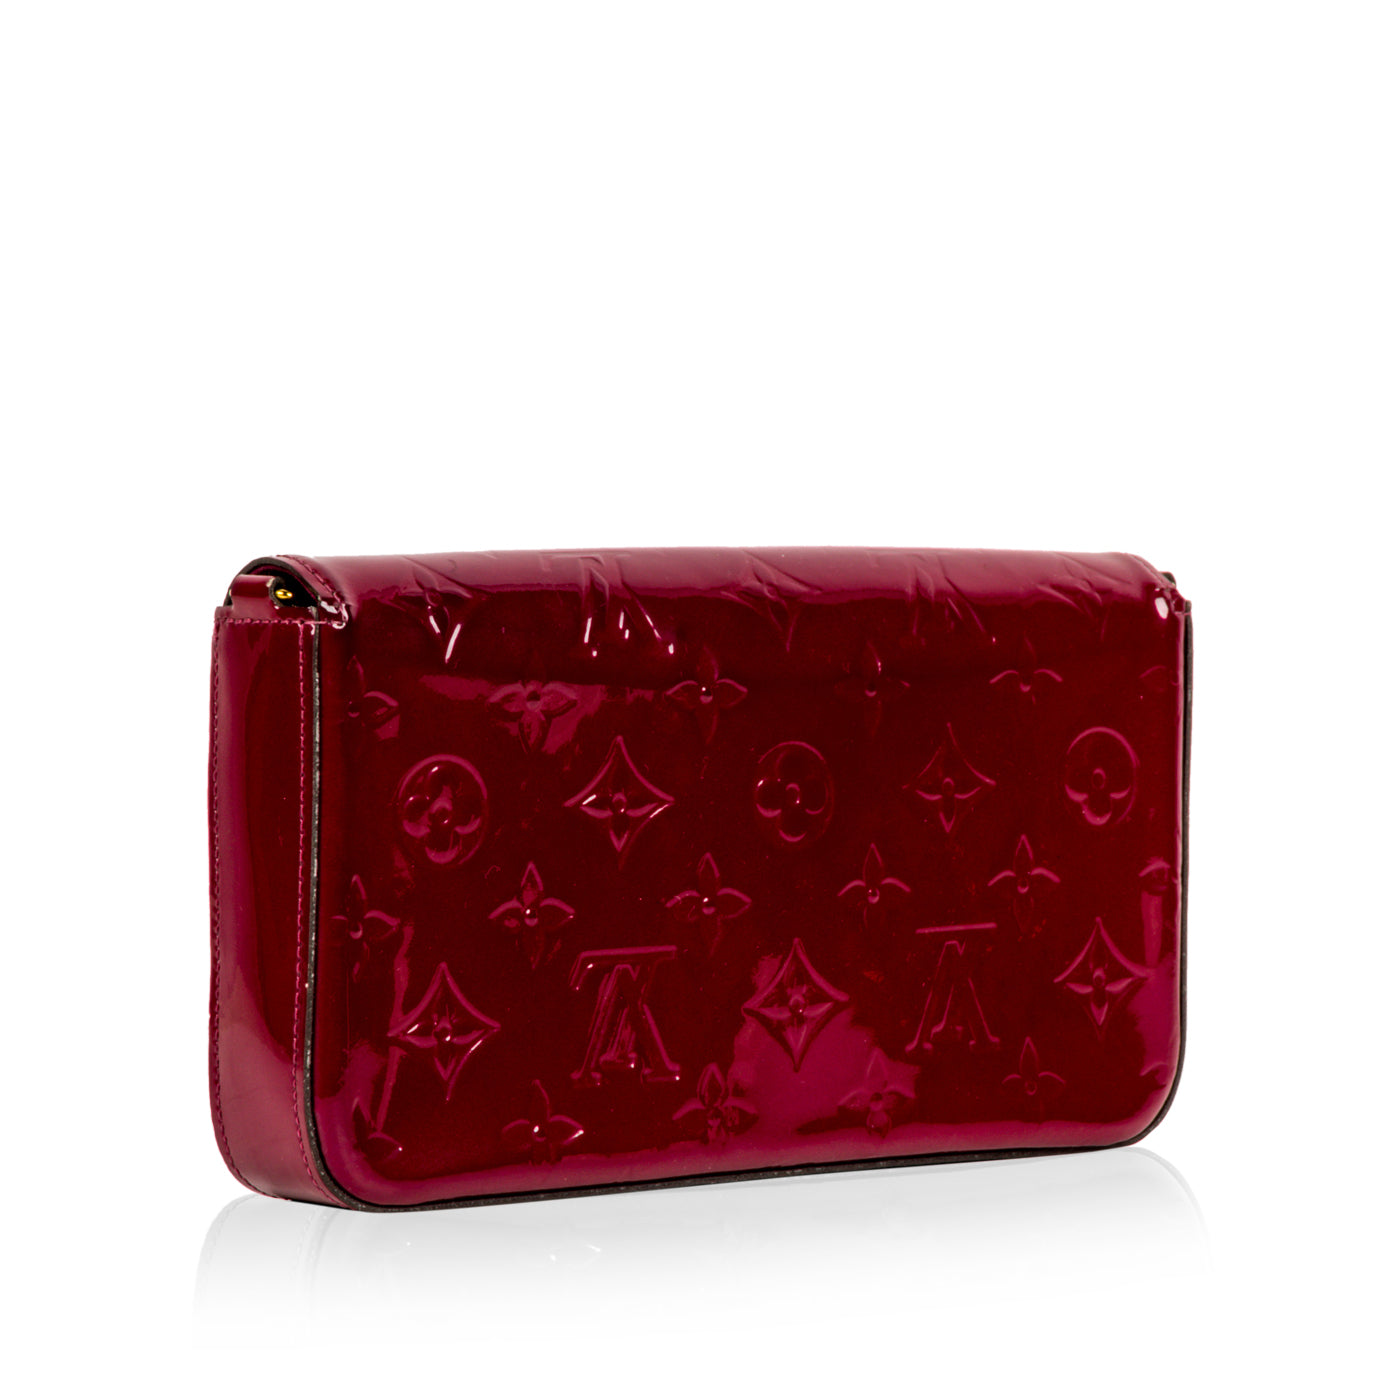 Compare prices for Félicie Pochette (M61276) in official stores